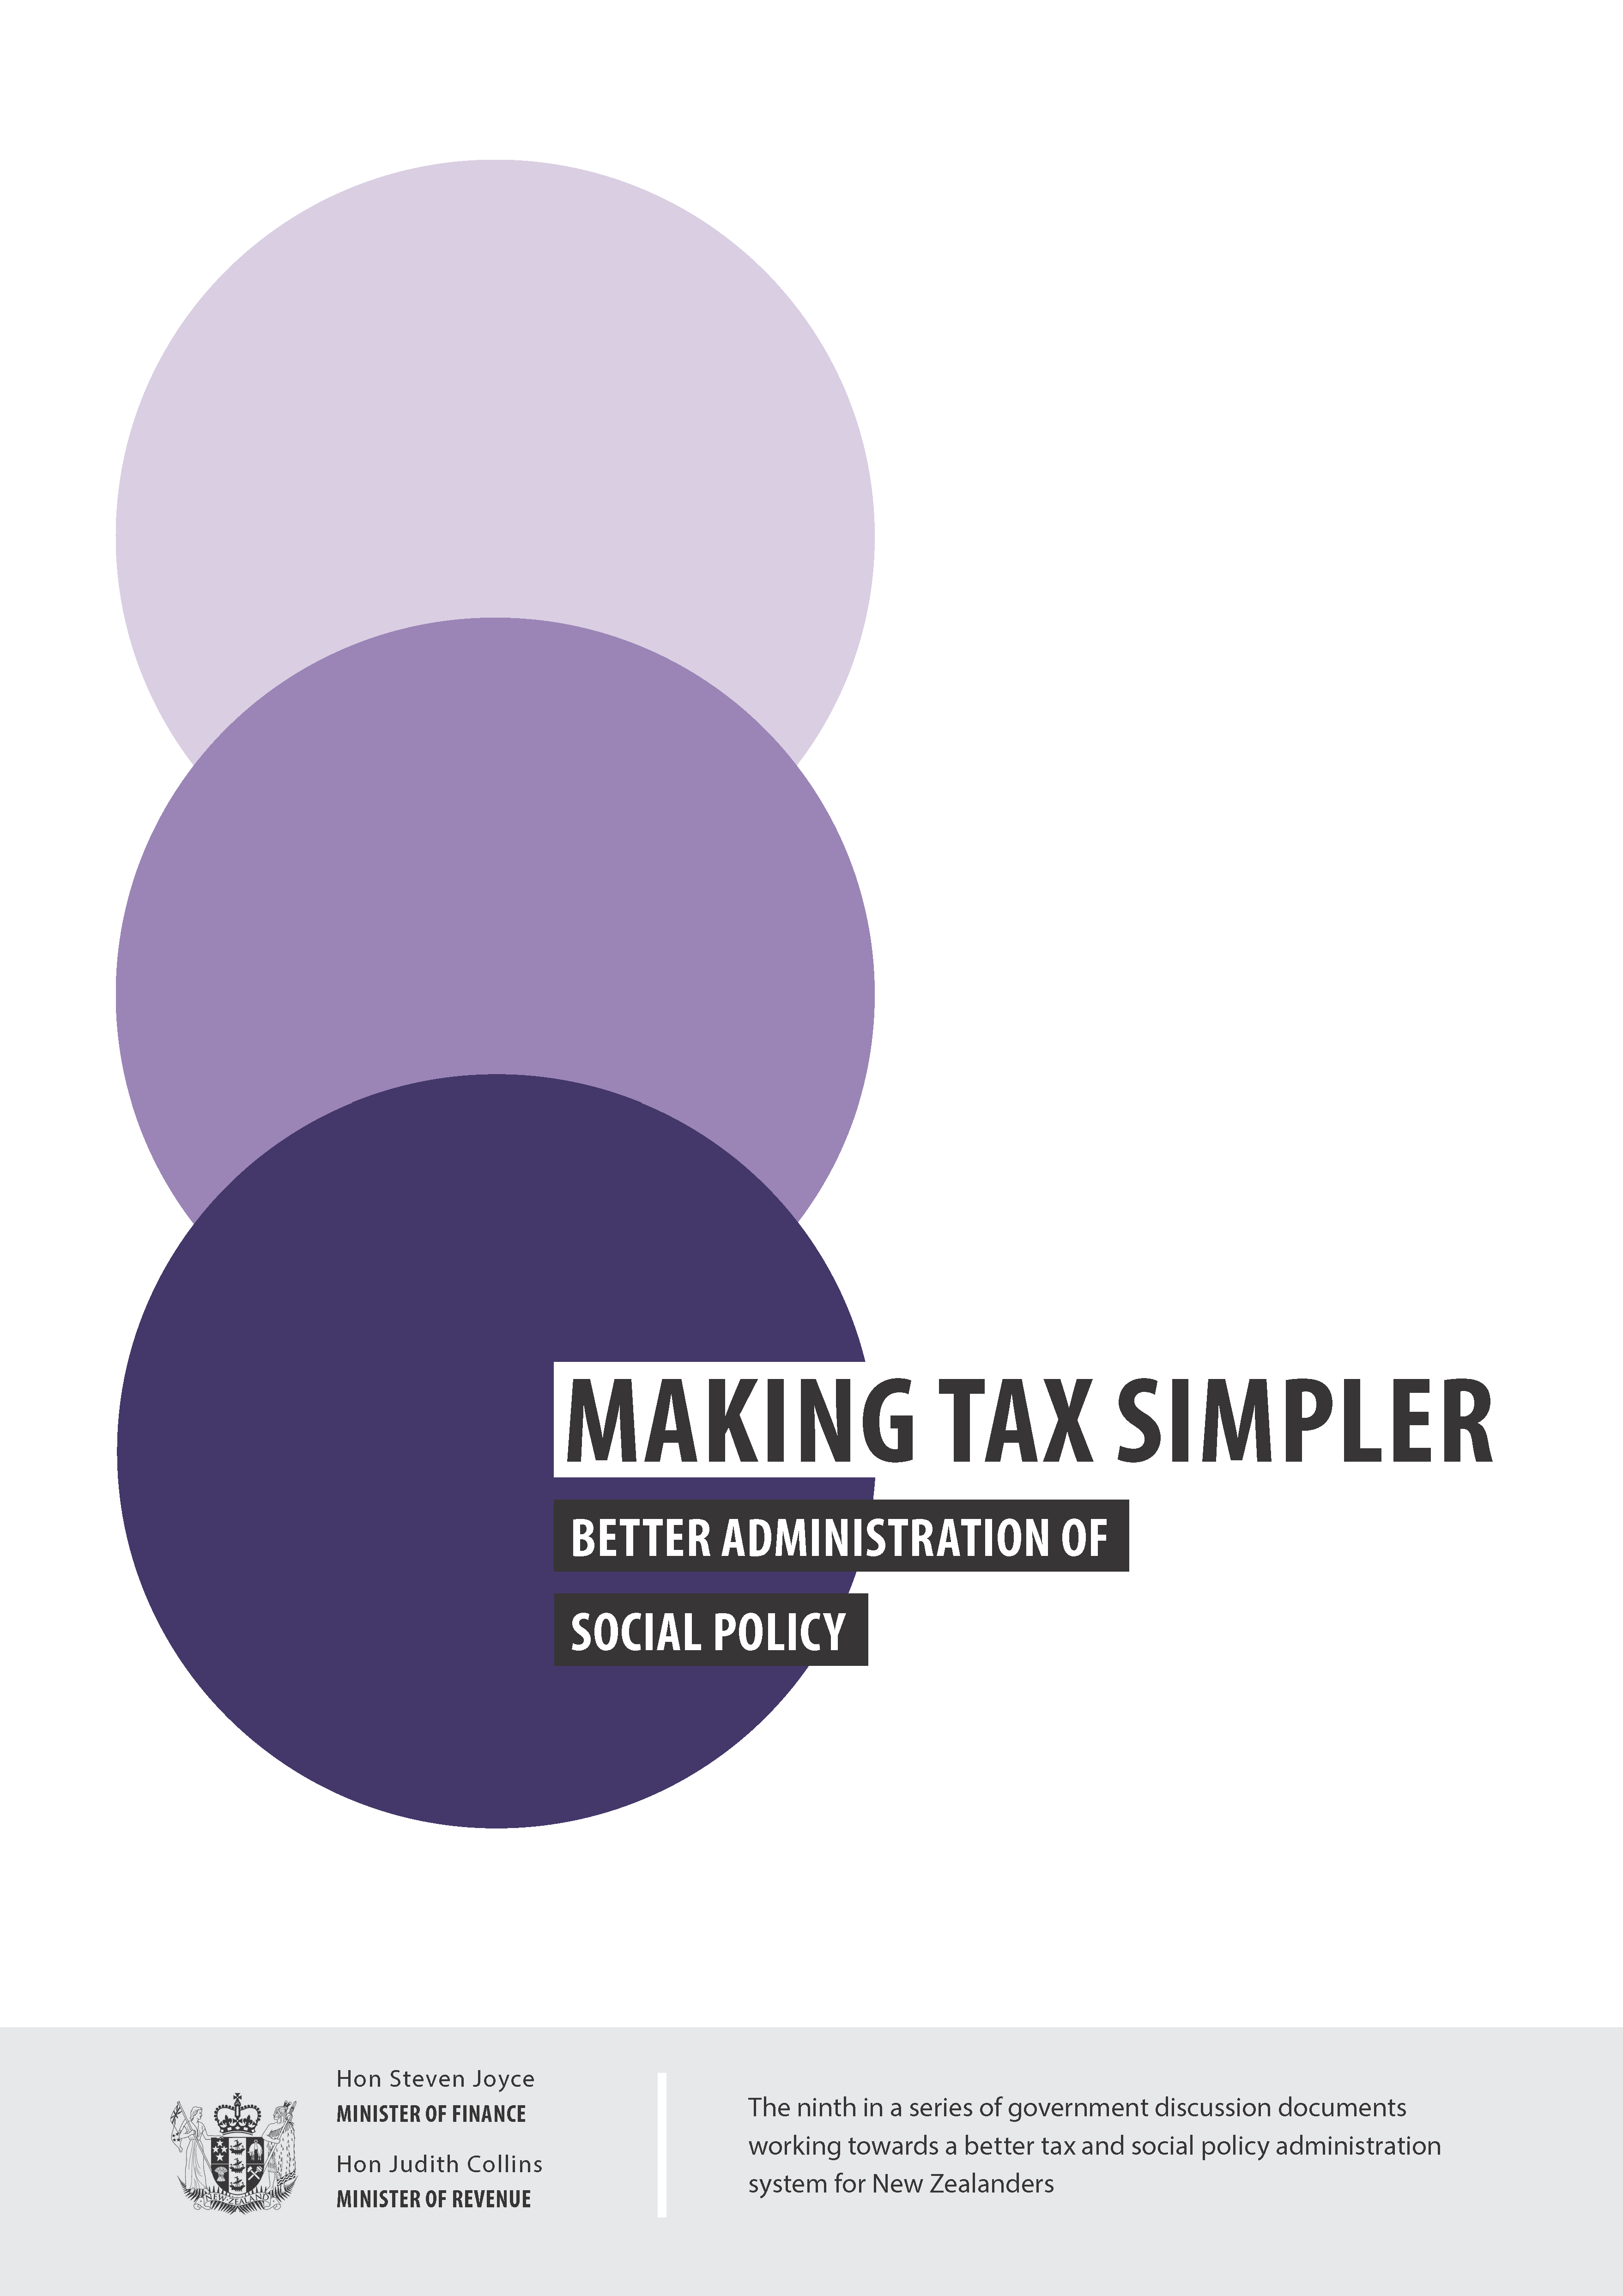 Publication cover. Title - Making tax simpler - Better administration of social policy (July 2017)